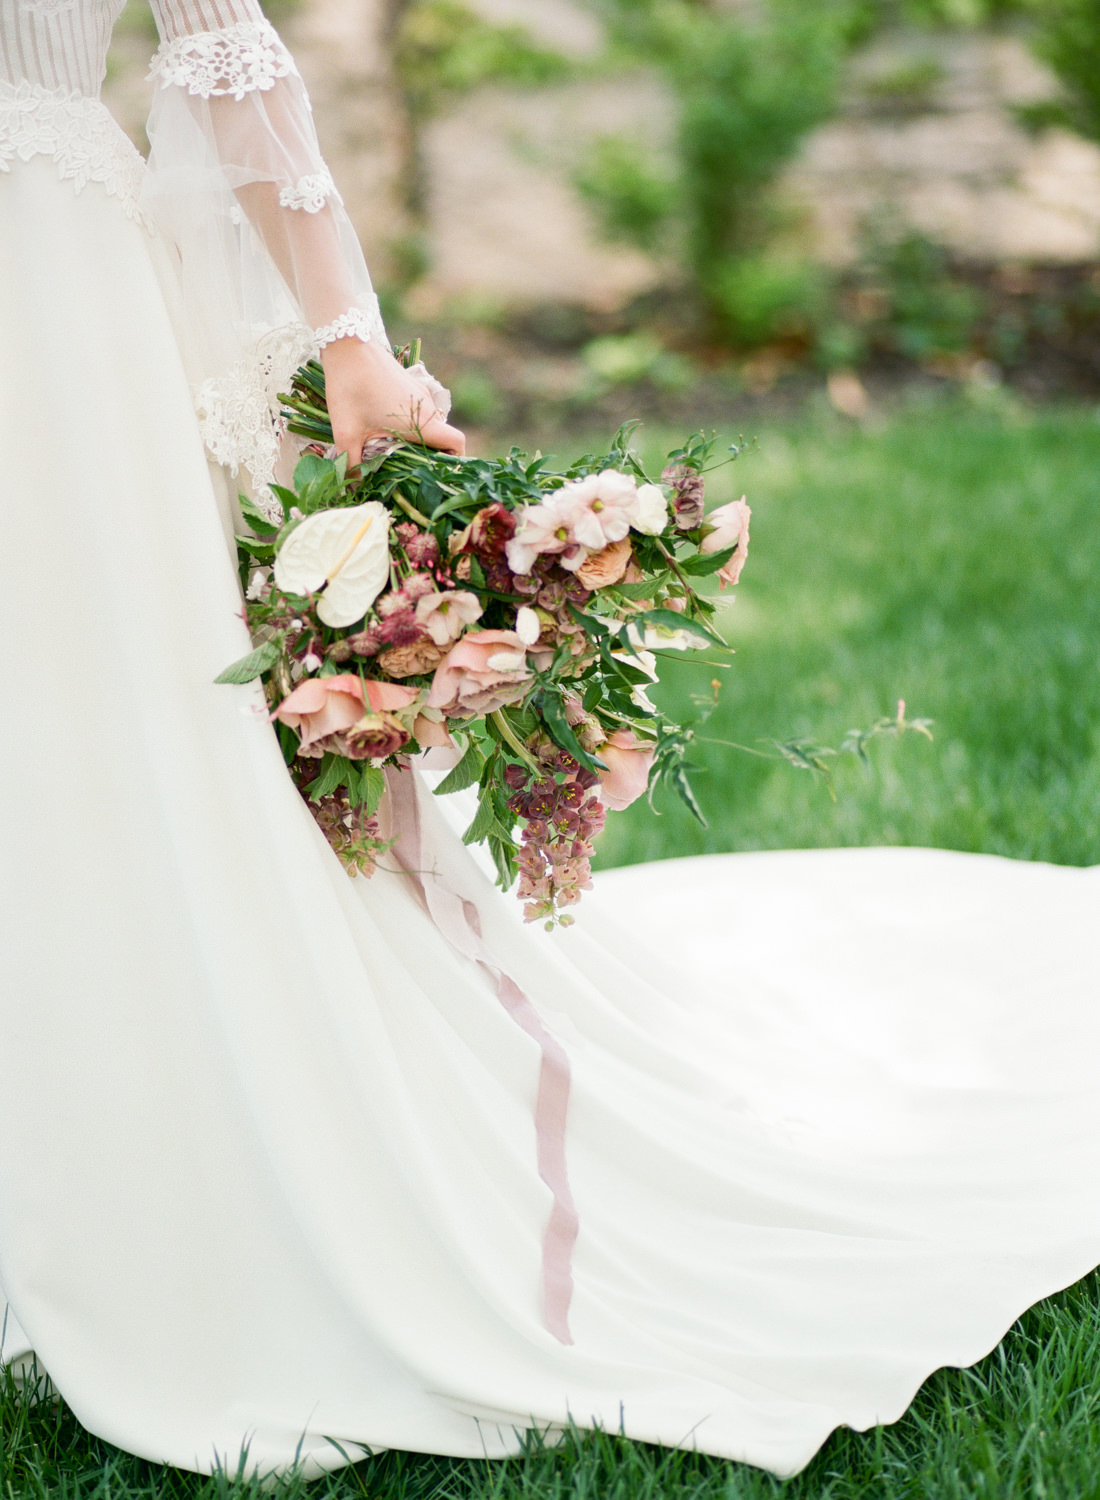 Mauve and pink bridal bouquet with ribbons, St. Louis Fine Art Film Wedding Photographer Erica Robnett Photography